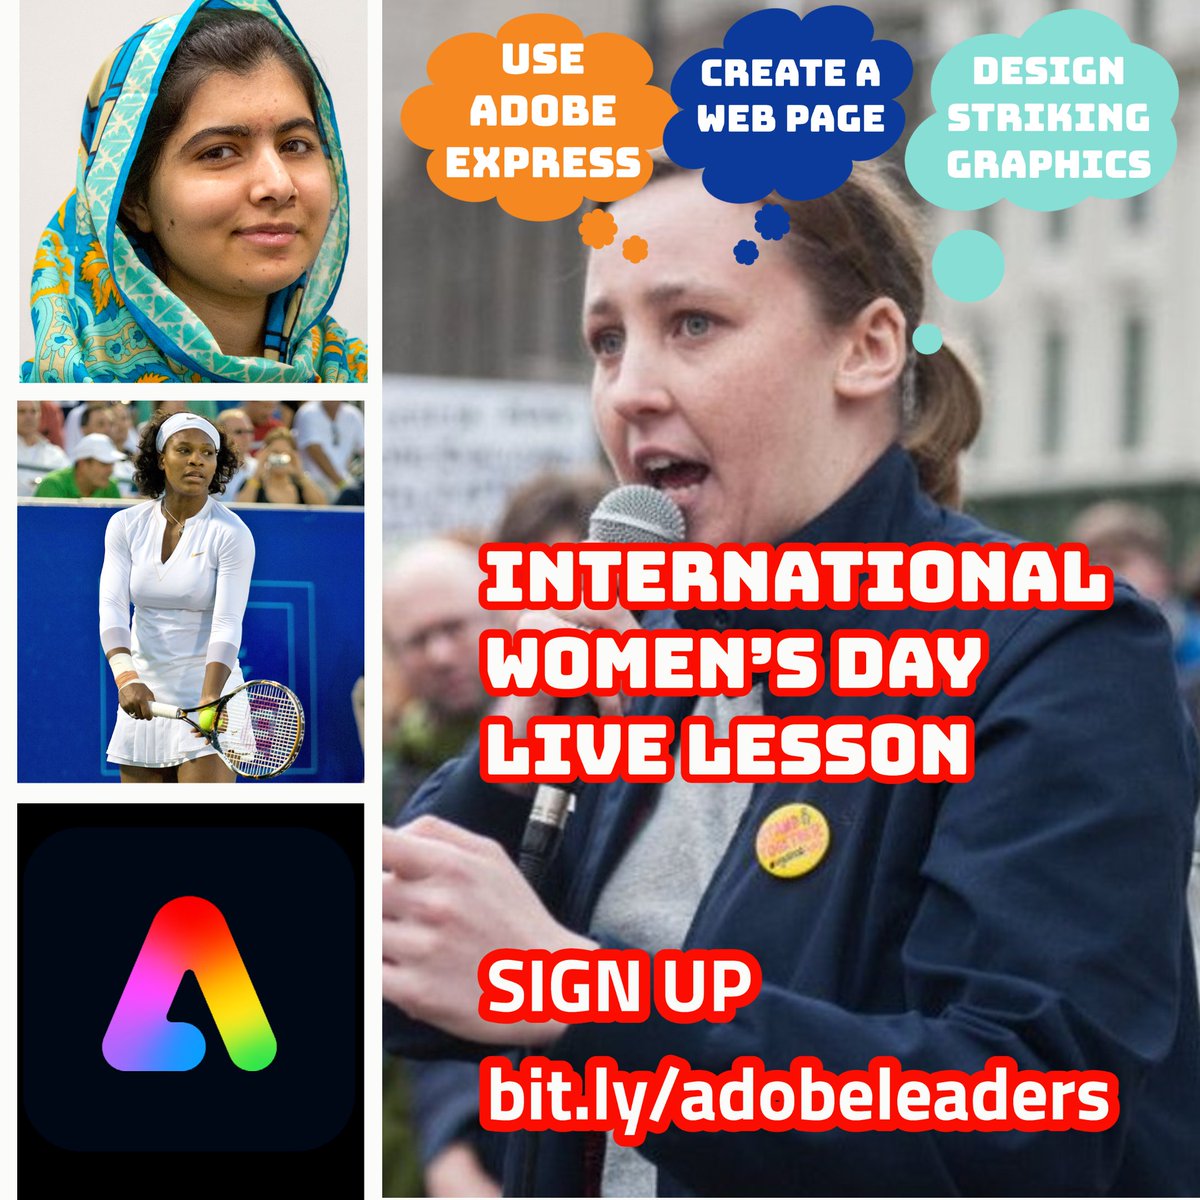 176 schools signed up for my FREE live lesson on #WorldBookDay and only 11 signed up for #InternationalWomensDay 🧐 Tagging inspirational female teachers to raise awareness of the female role models that ALL learners should be researching Sign up - bit.ly/adobeleaders